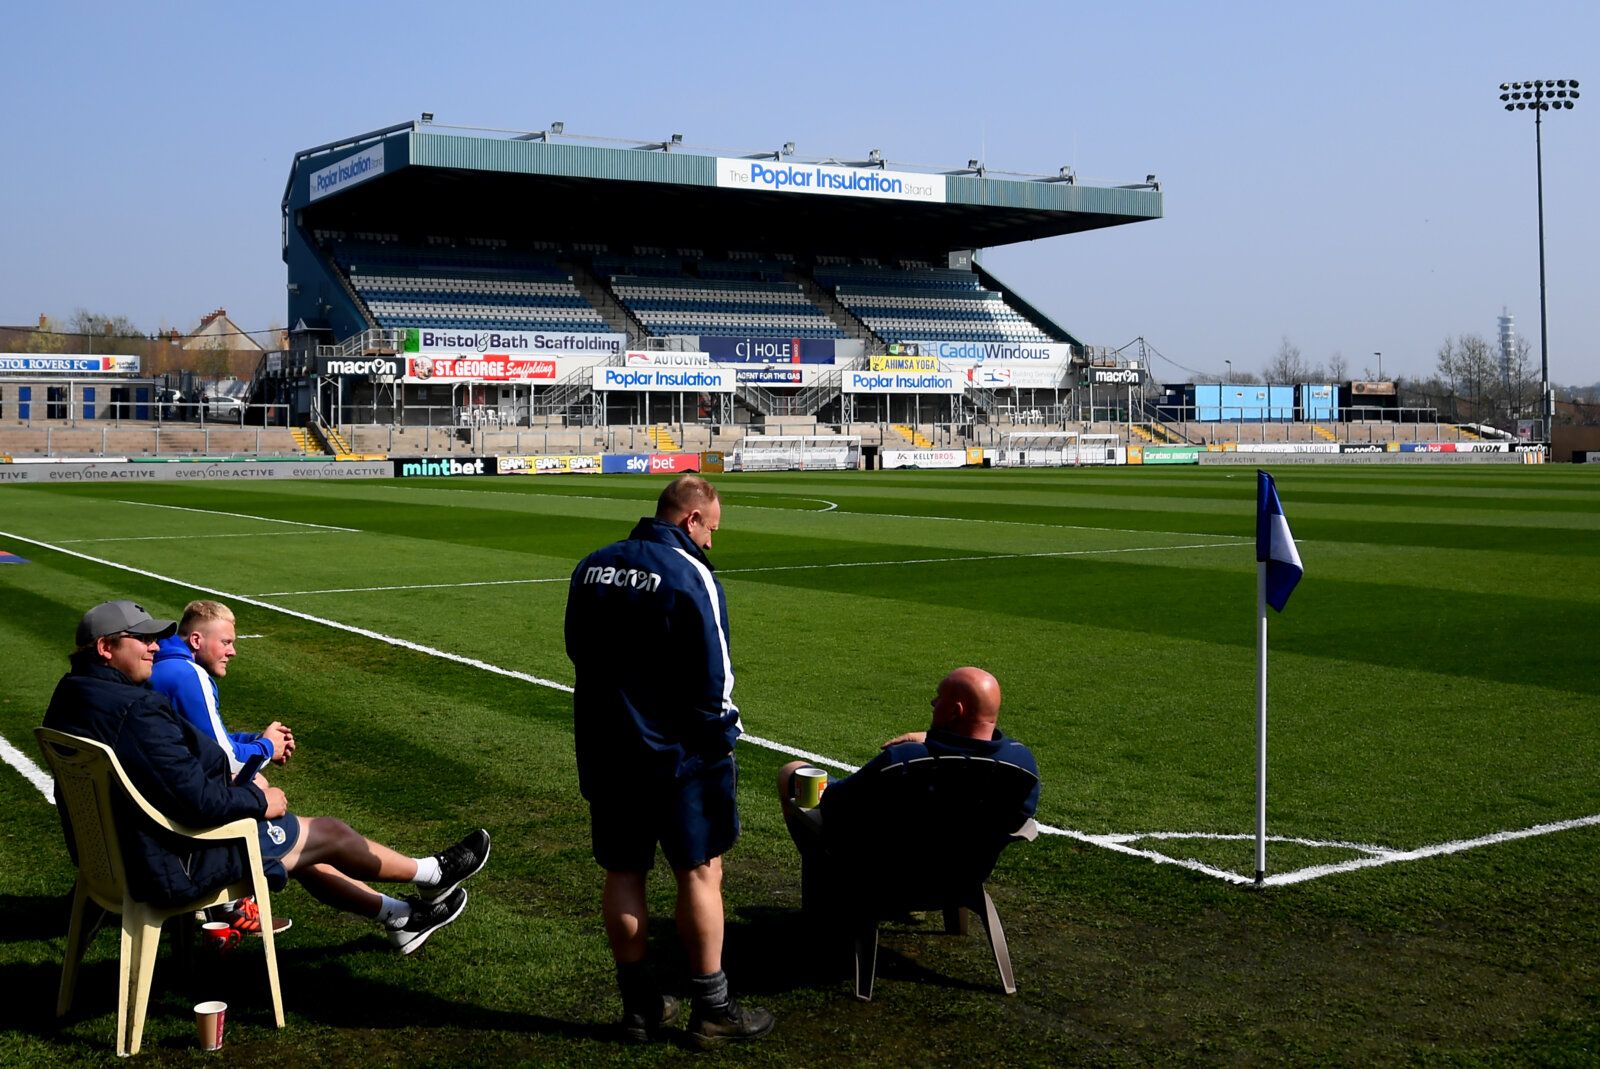 BRISTOL, ENGLAND - MARCH 30: Members of the Bristol Rovers Ground-staff relax prior to the Sky Bet League One match between Bristol Rovers and Luton Town at Memorial Stadium on March 30, 2019 in Bristol, United Kingdom. (Photo by Alex Davidson/Getty Images)